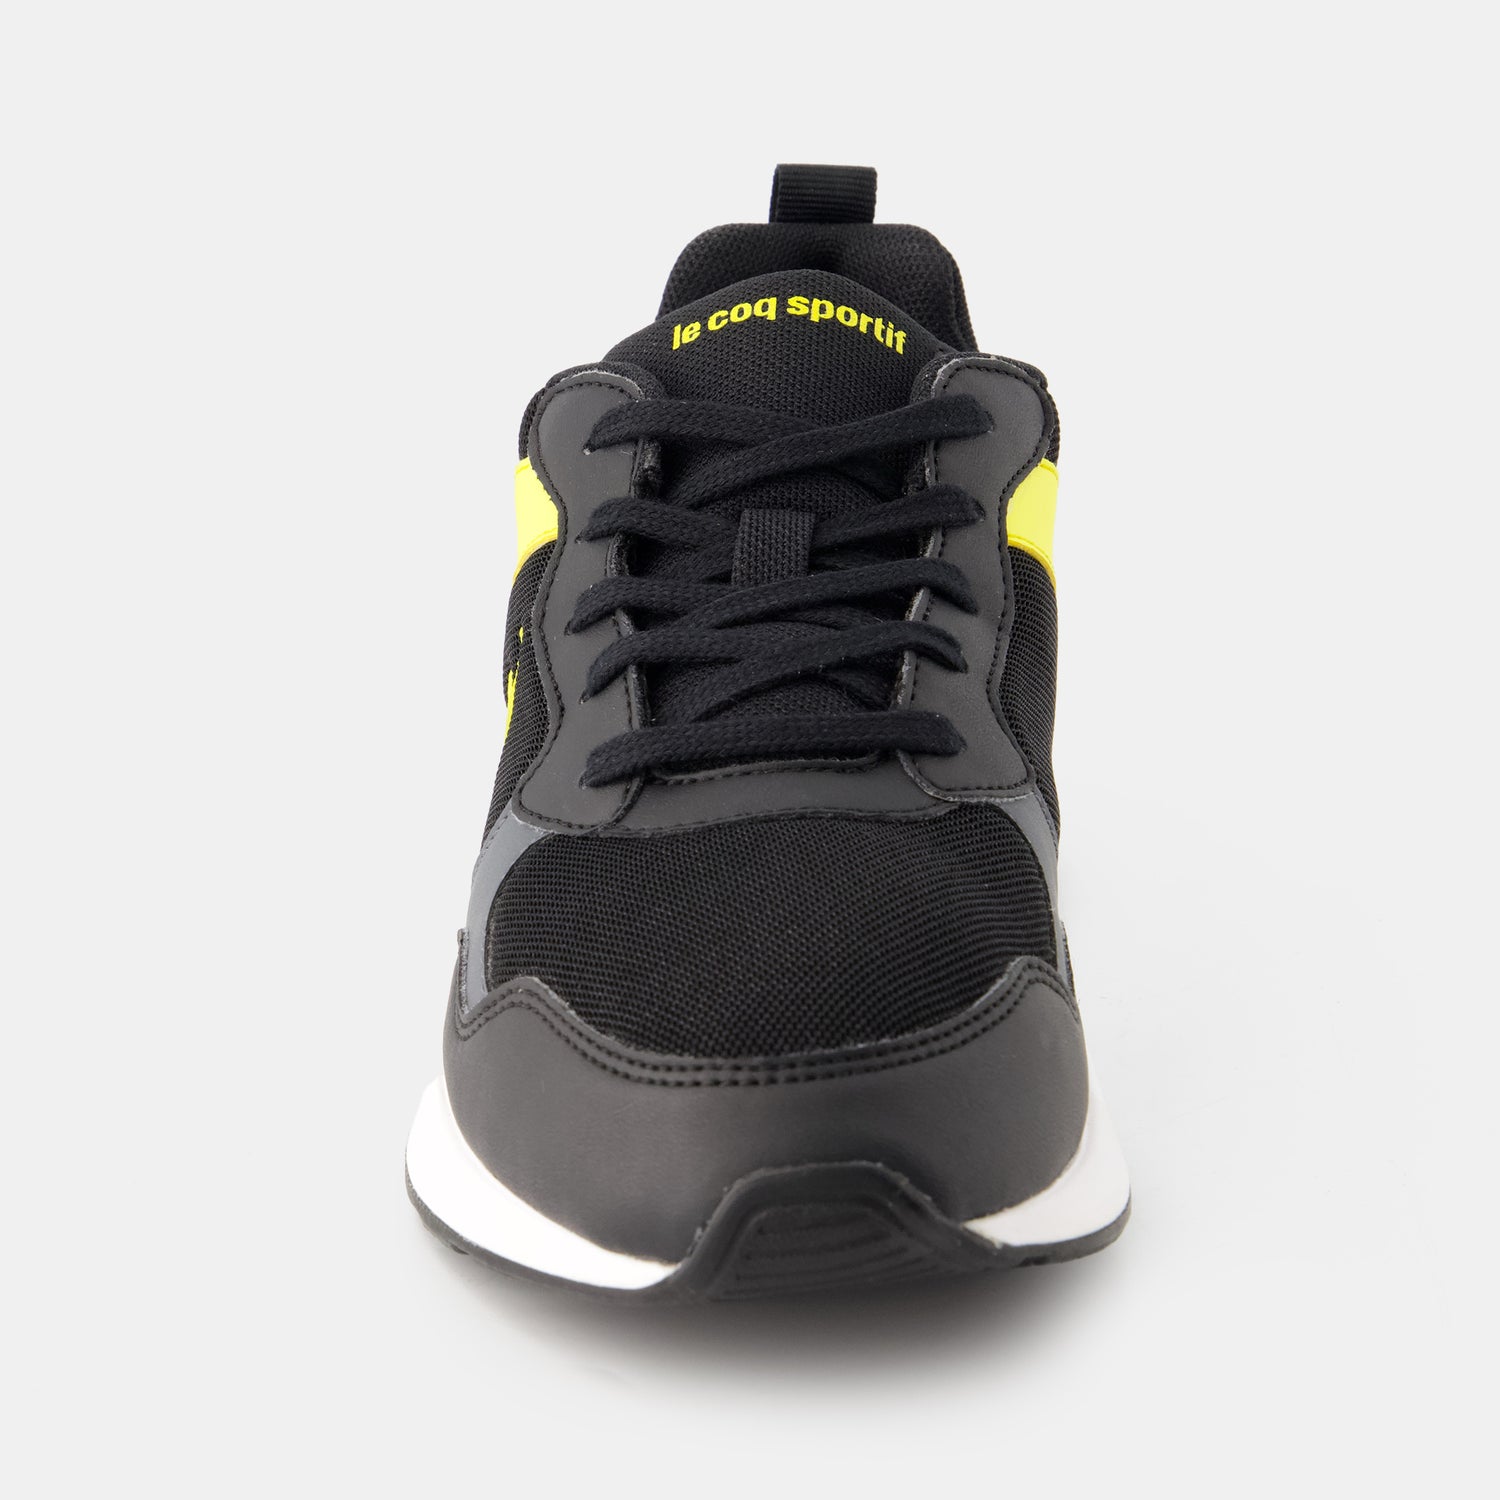 2410734-R500 GS black/ blazing yellow  | Shoes R500 GS for kids